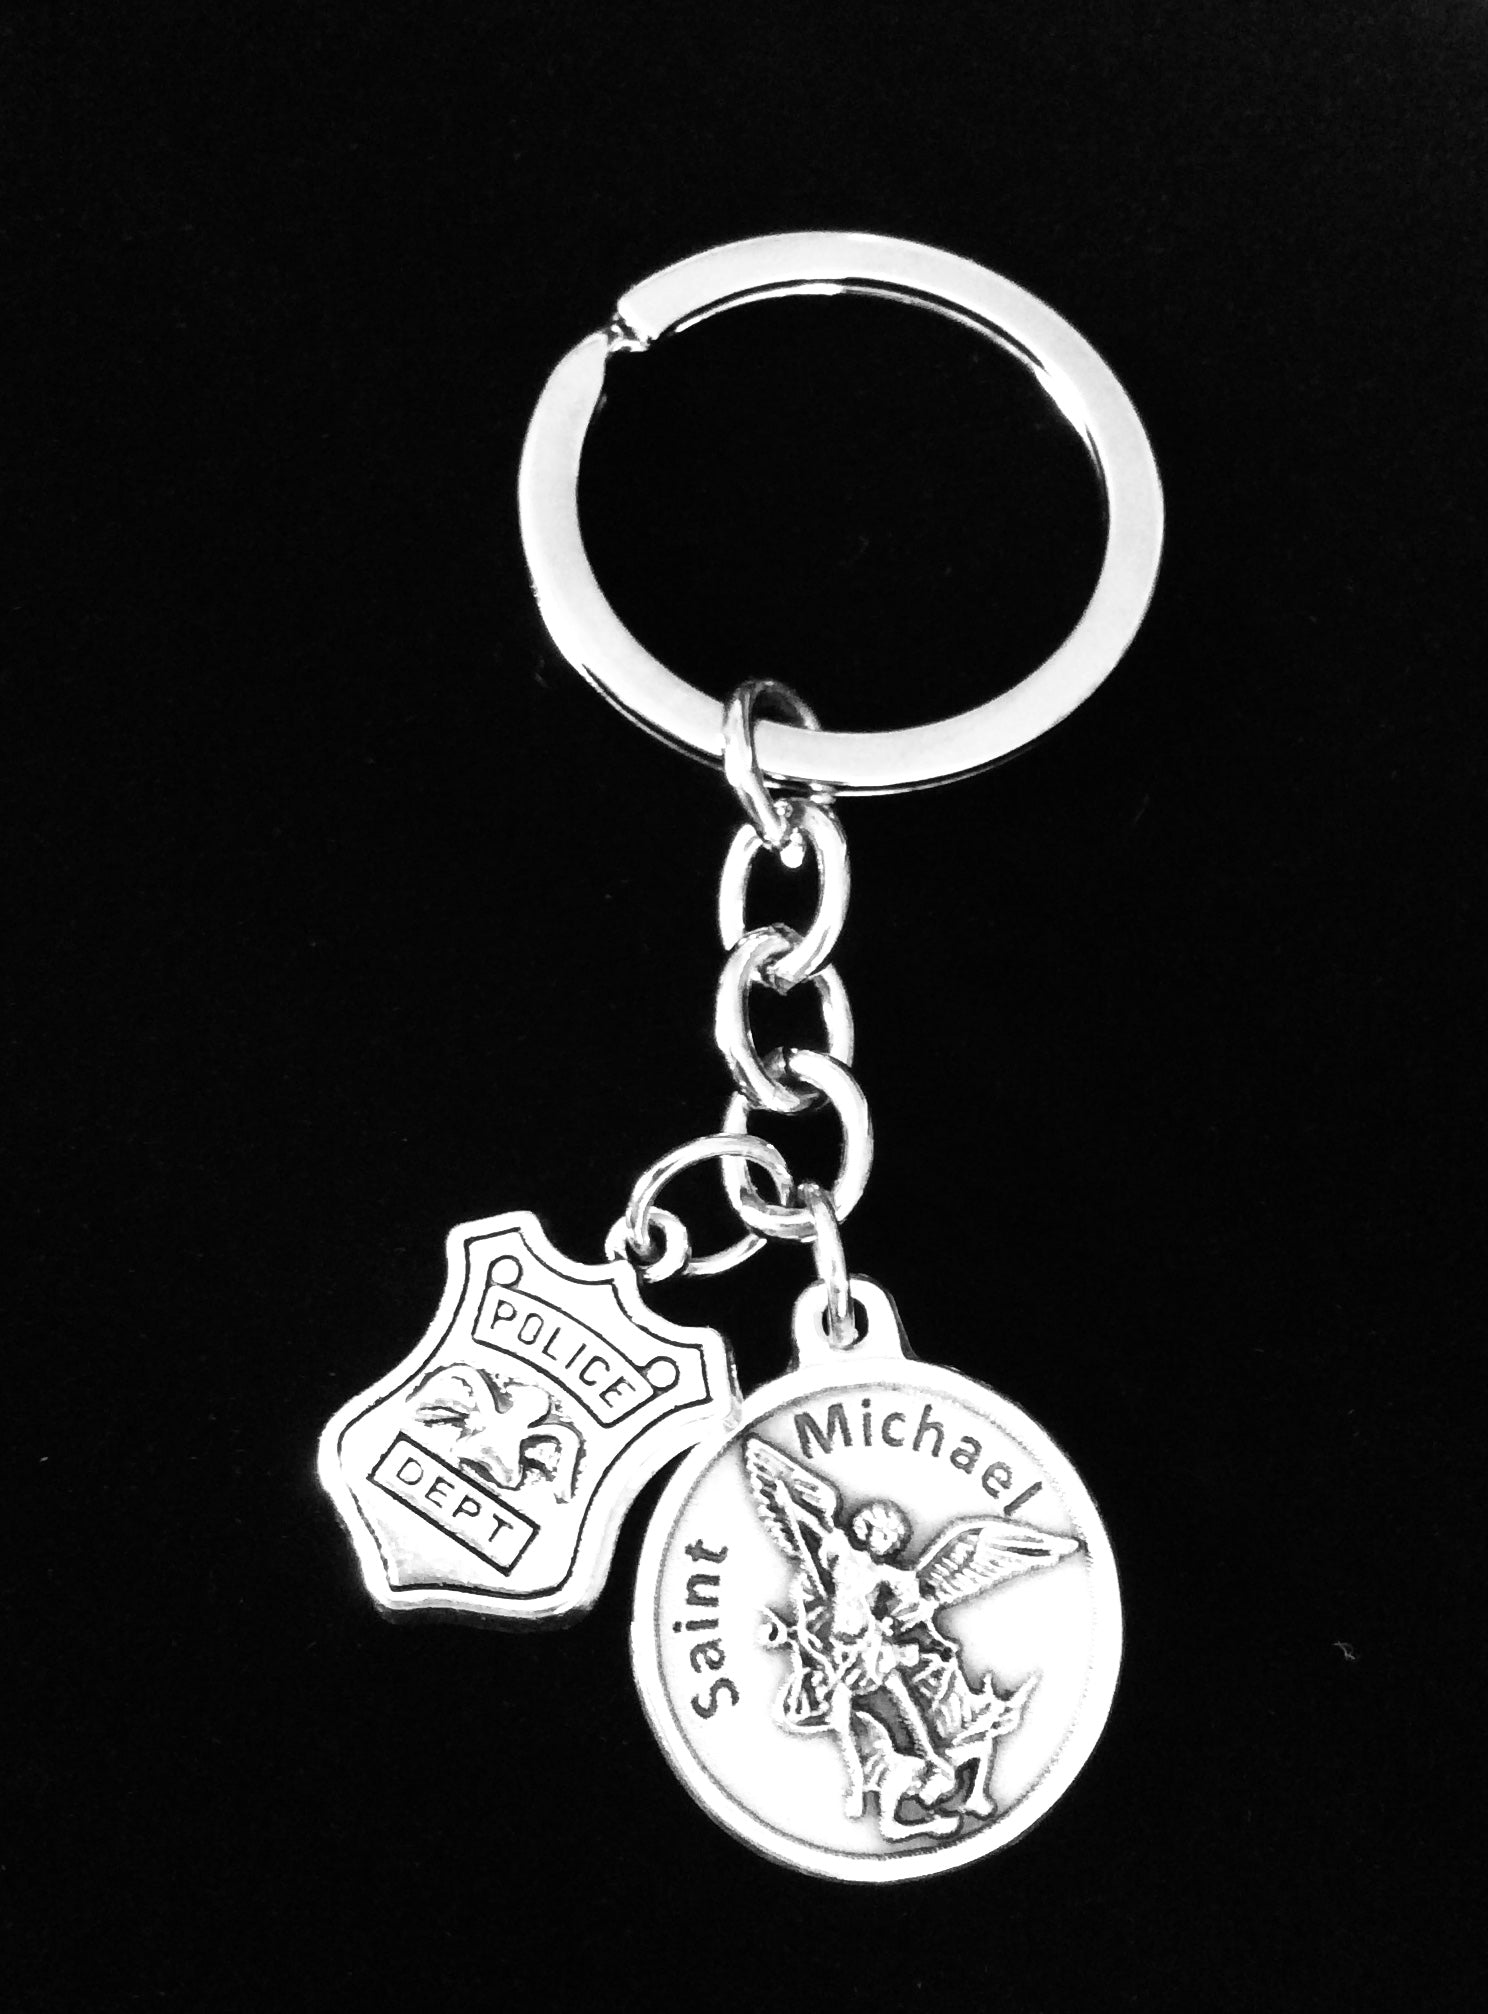 Jules Obsession Police Officer Gift Saint Michael Serve and Protect Fob Keychain Silver Key Chain Keyring Fob Protection Gift